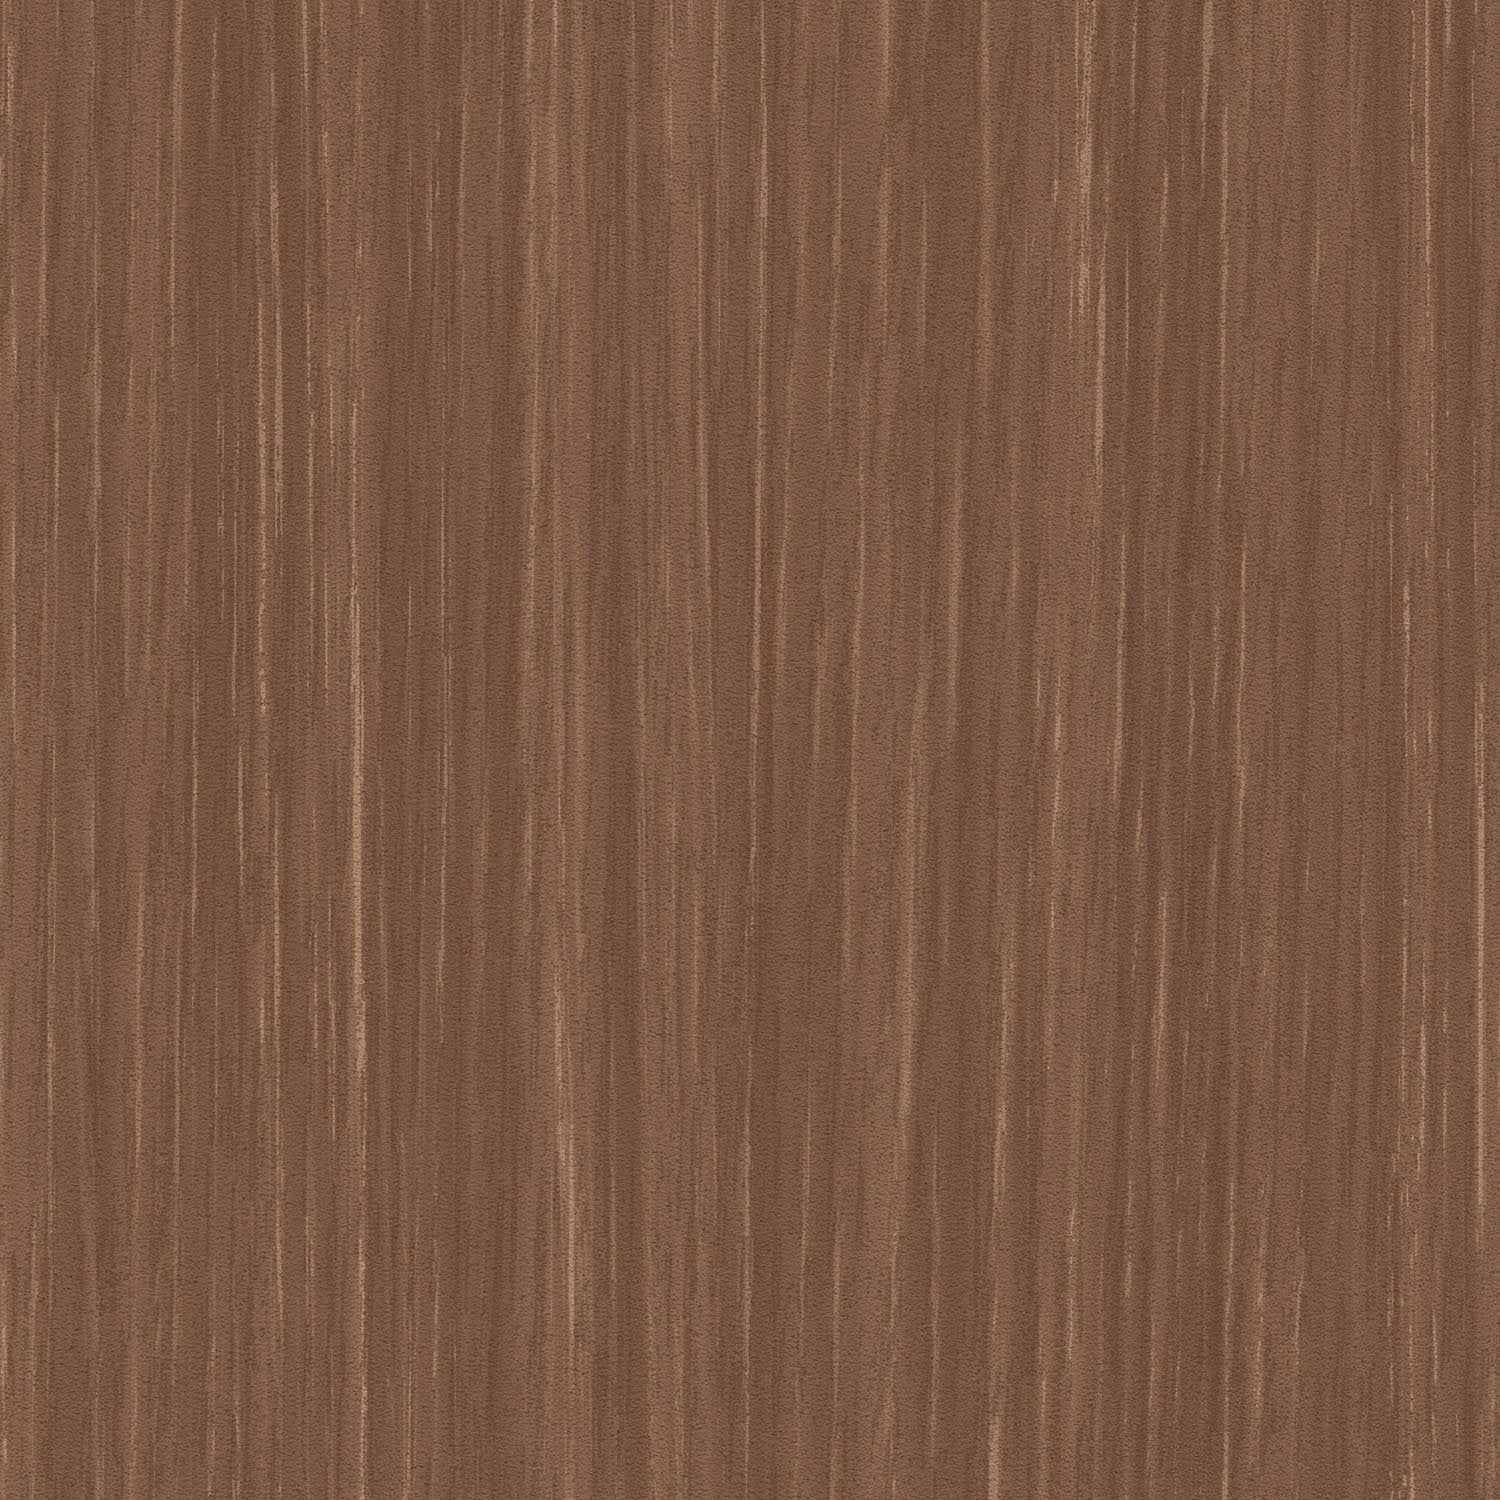 Sherwood - Y47974 - Wallcovering - Vycon - Kube Contract